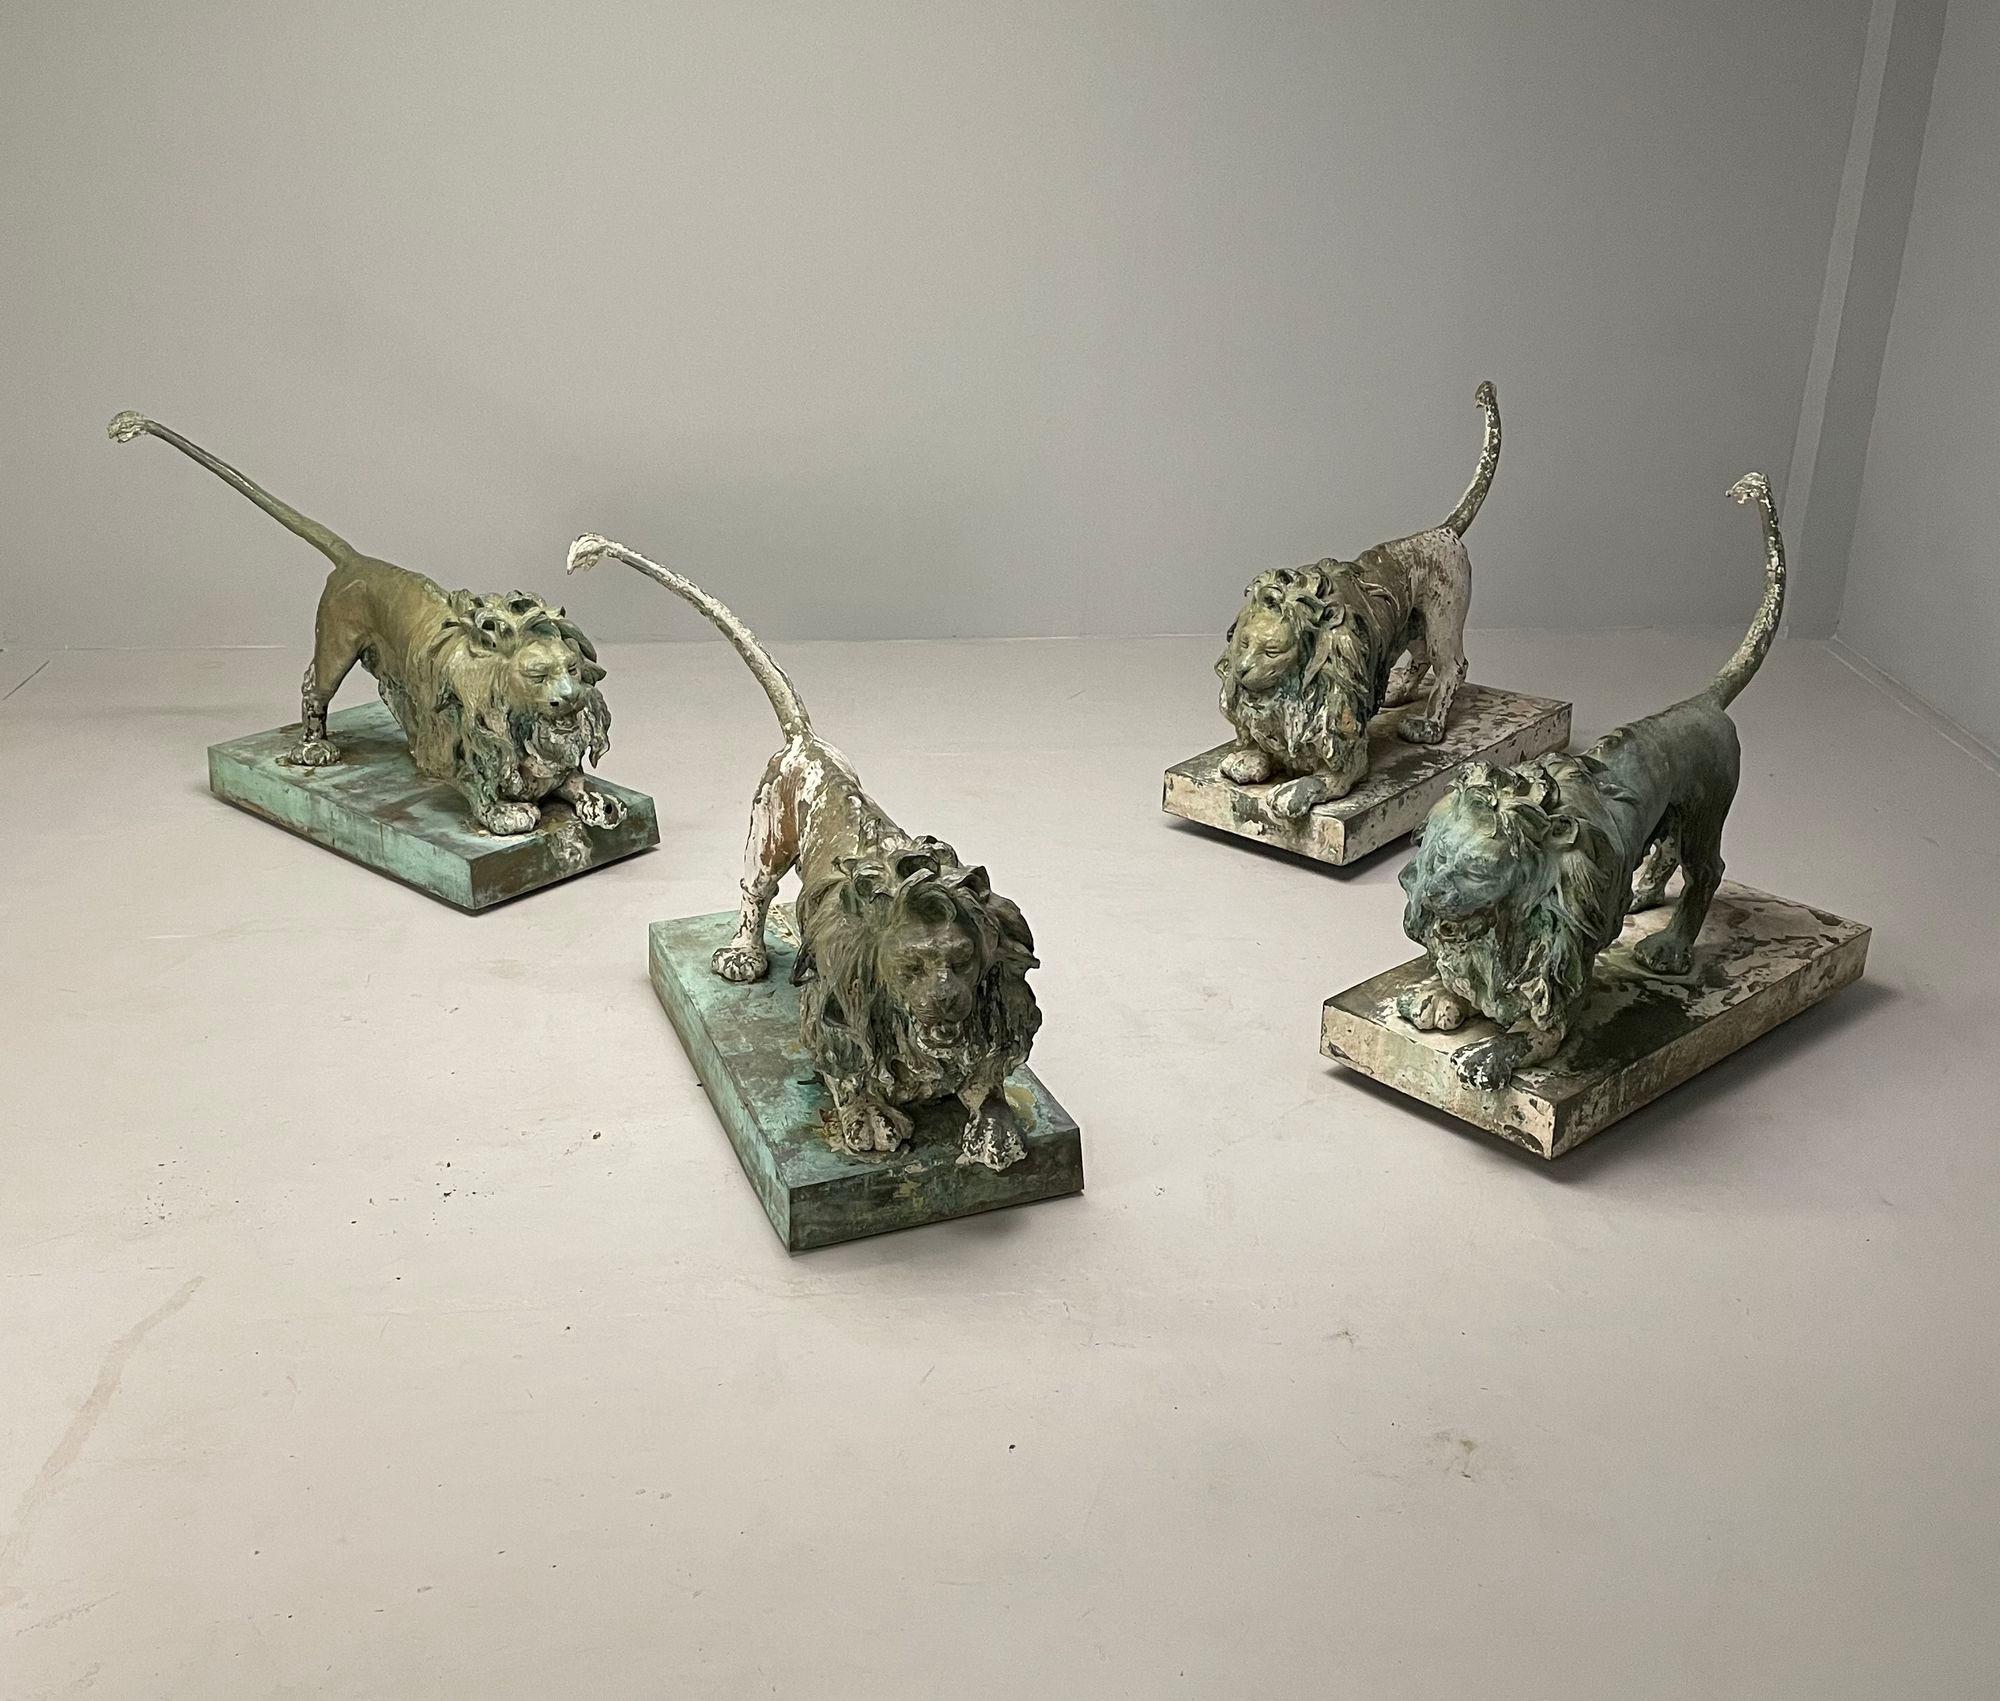 Pair of Lifesize Bronze Lion Fountains on Pedestals, 19th Century Monumental Outdoor Statues, Priced for pair (two pairs available)
Two monumental bronze lions from a Greenwich Connecticut mansion. These fine Grand Tour bronze full bodied lions